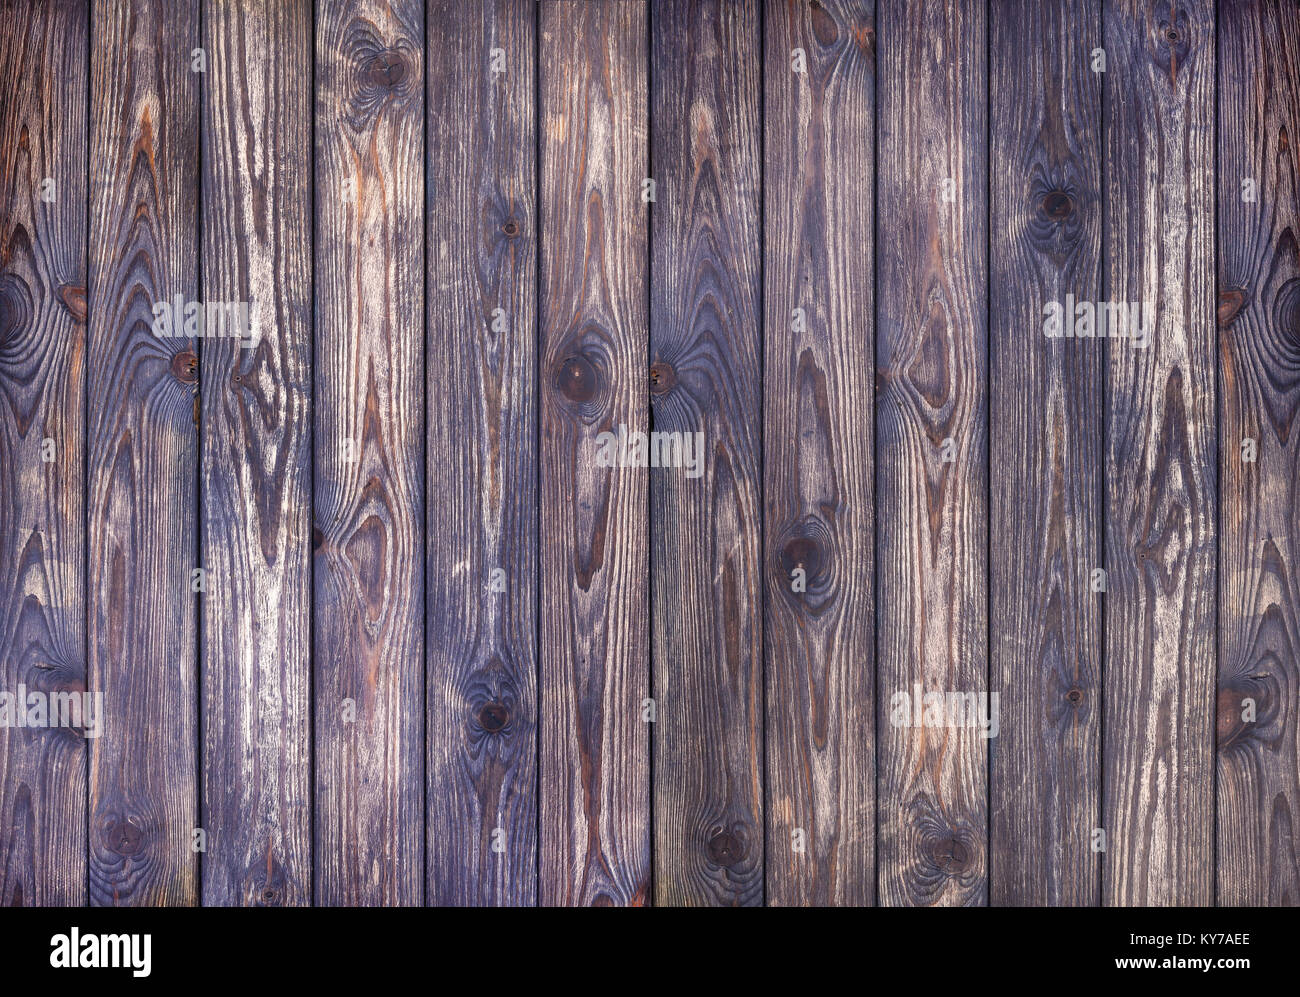 Dark wooden texture, old scratched wood Stock Photo